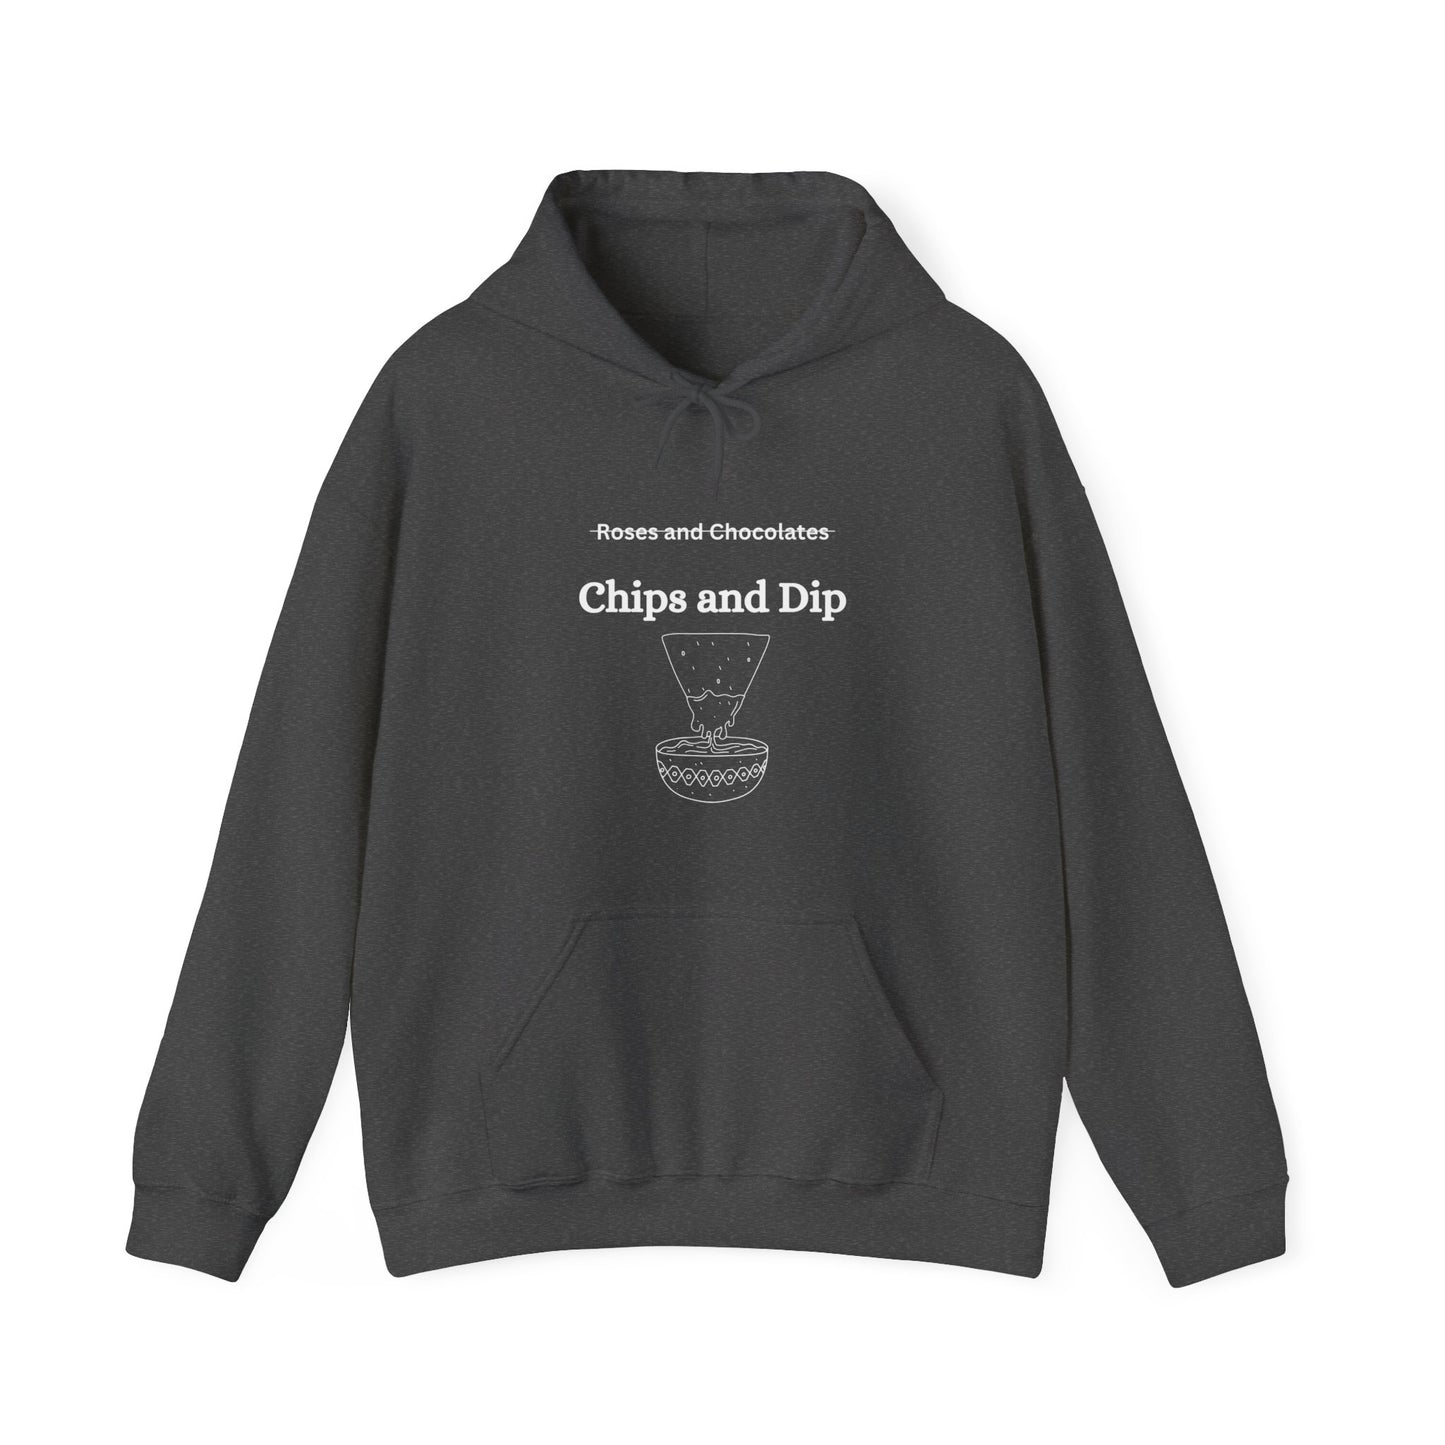 Chips and Dip Funny Valentine's Day Hooded Sweatshirt